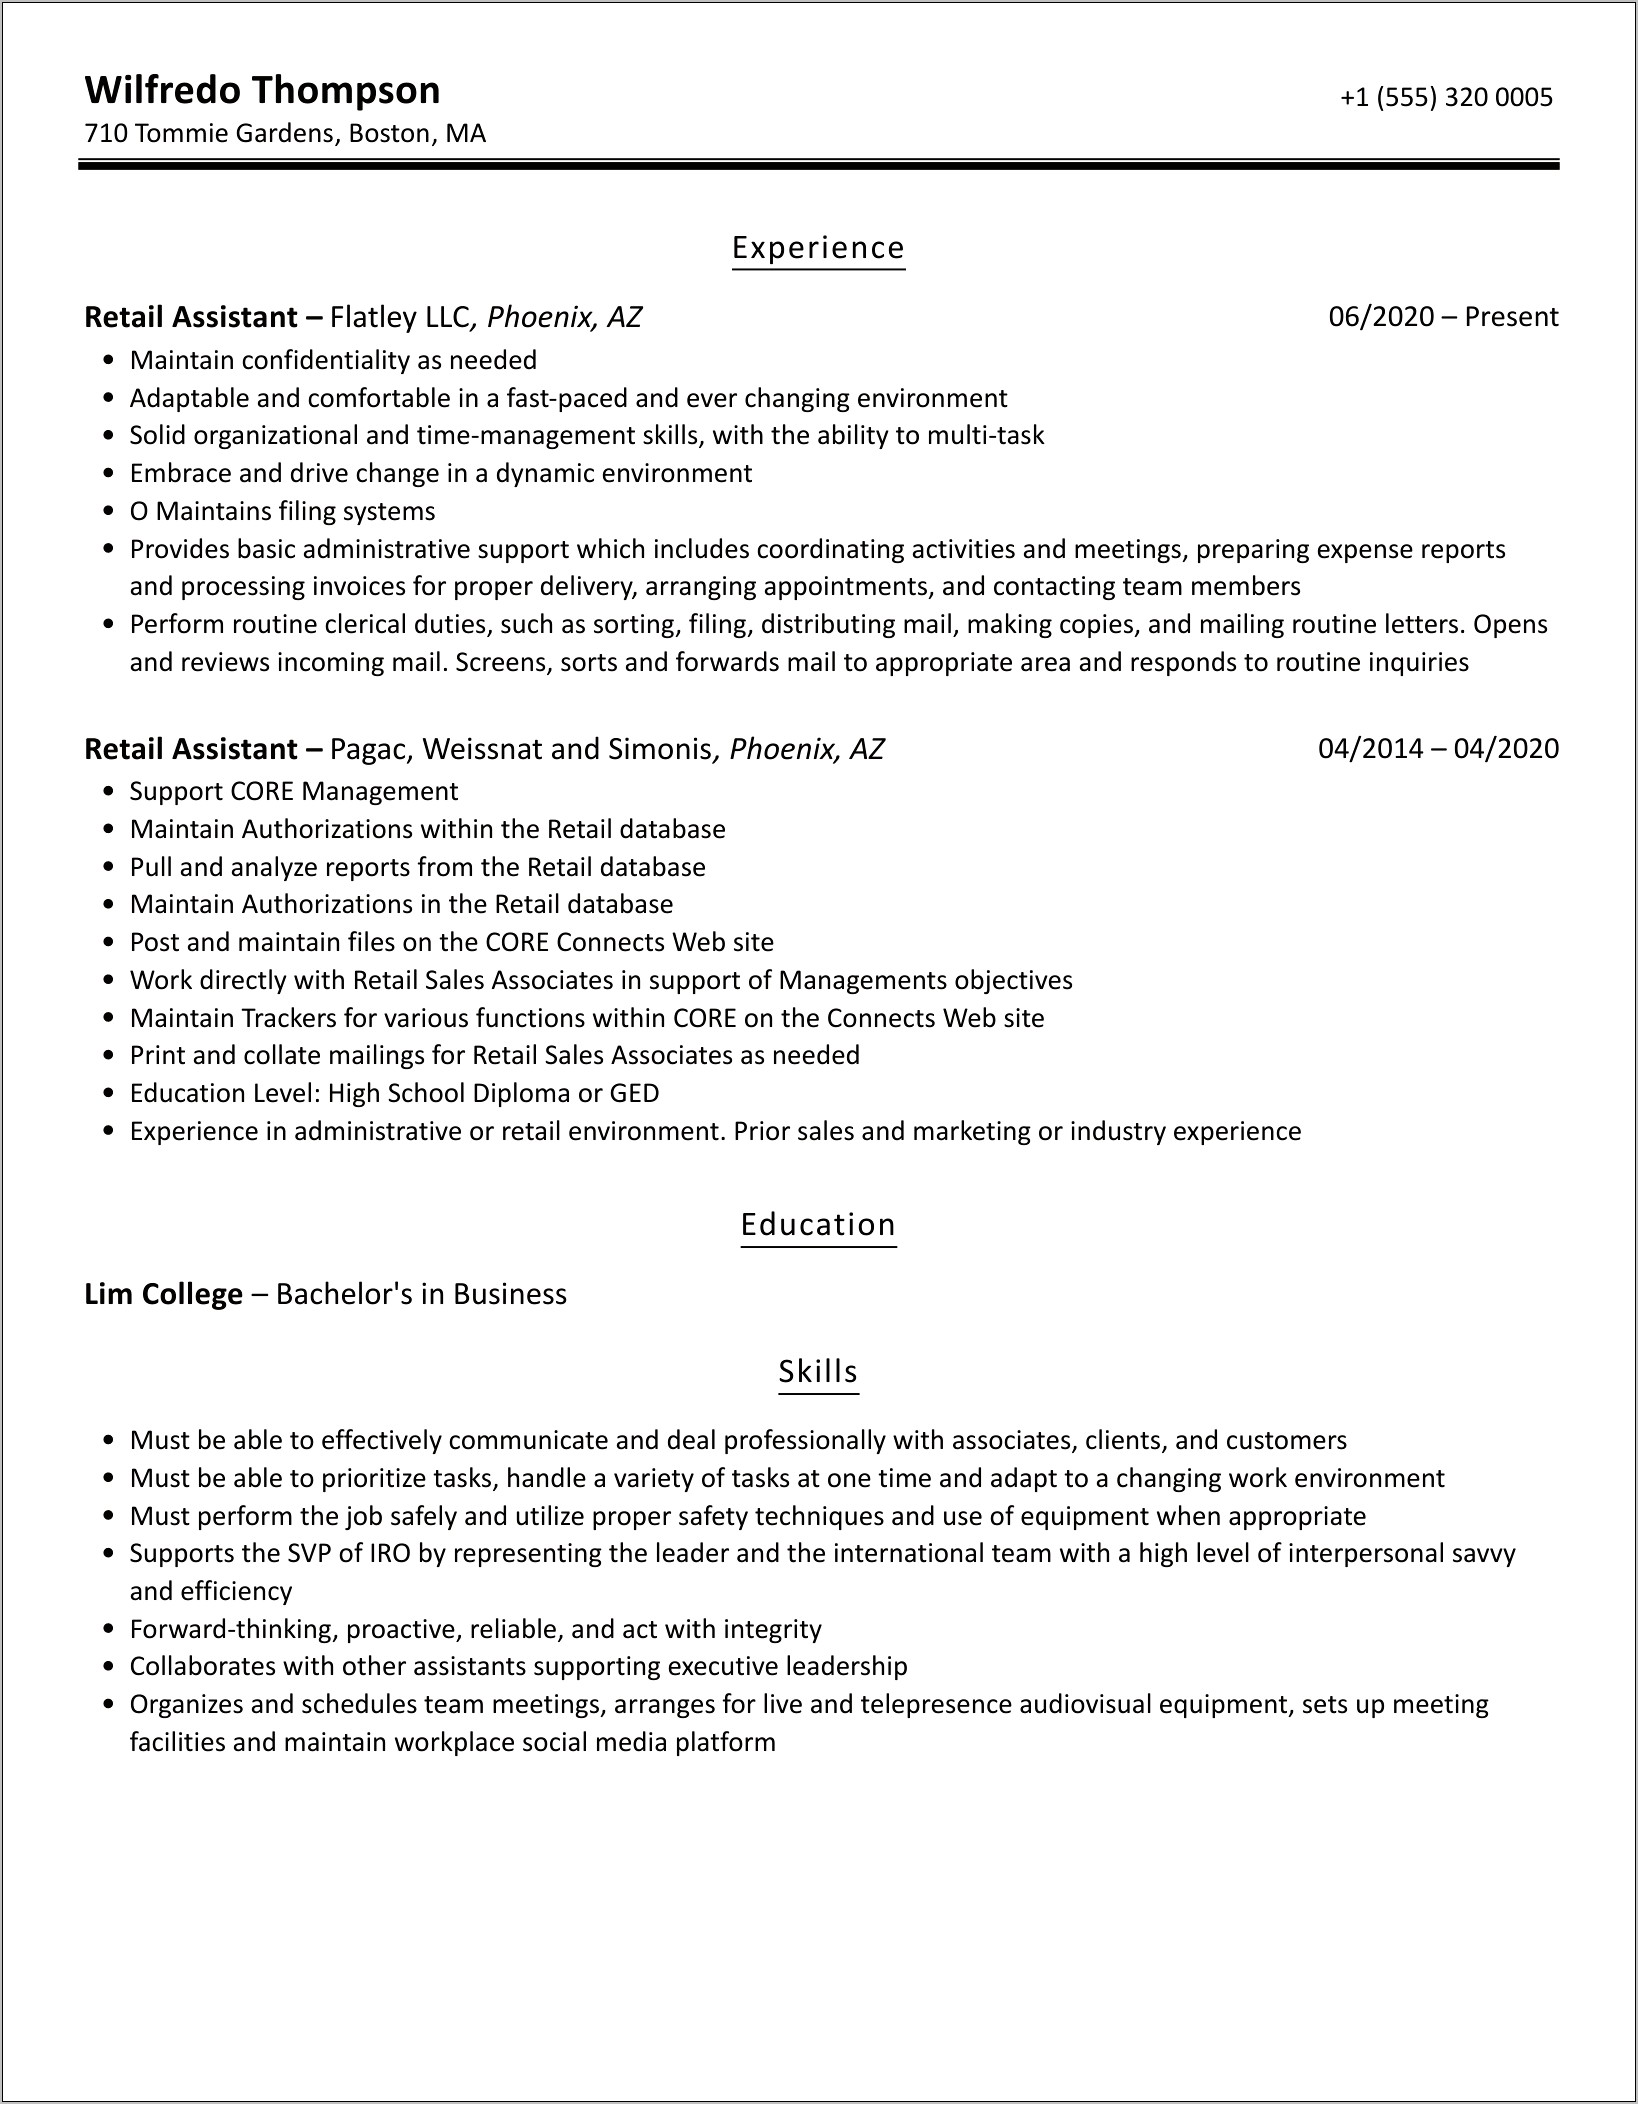 Resume Example For Retail Assistant